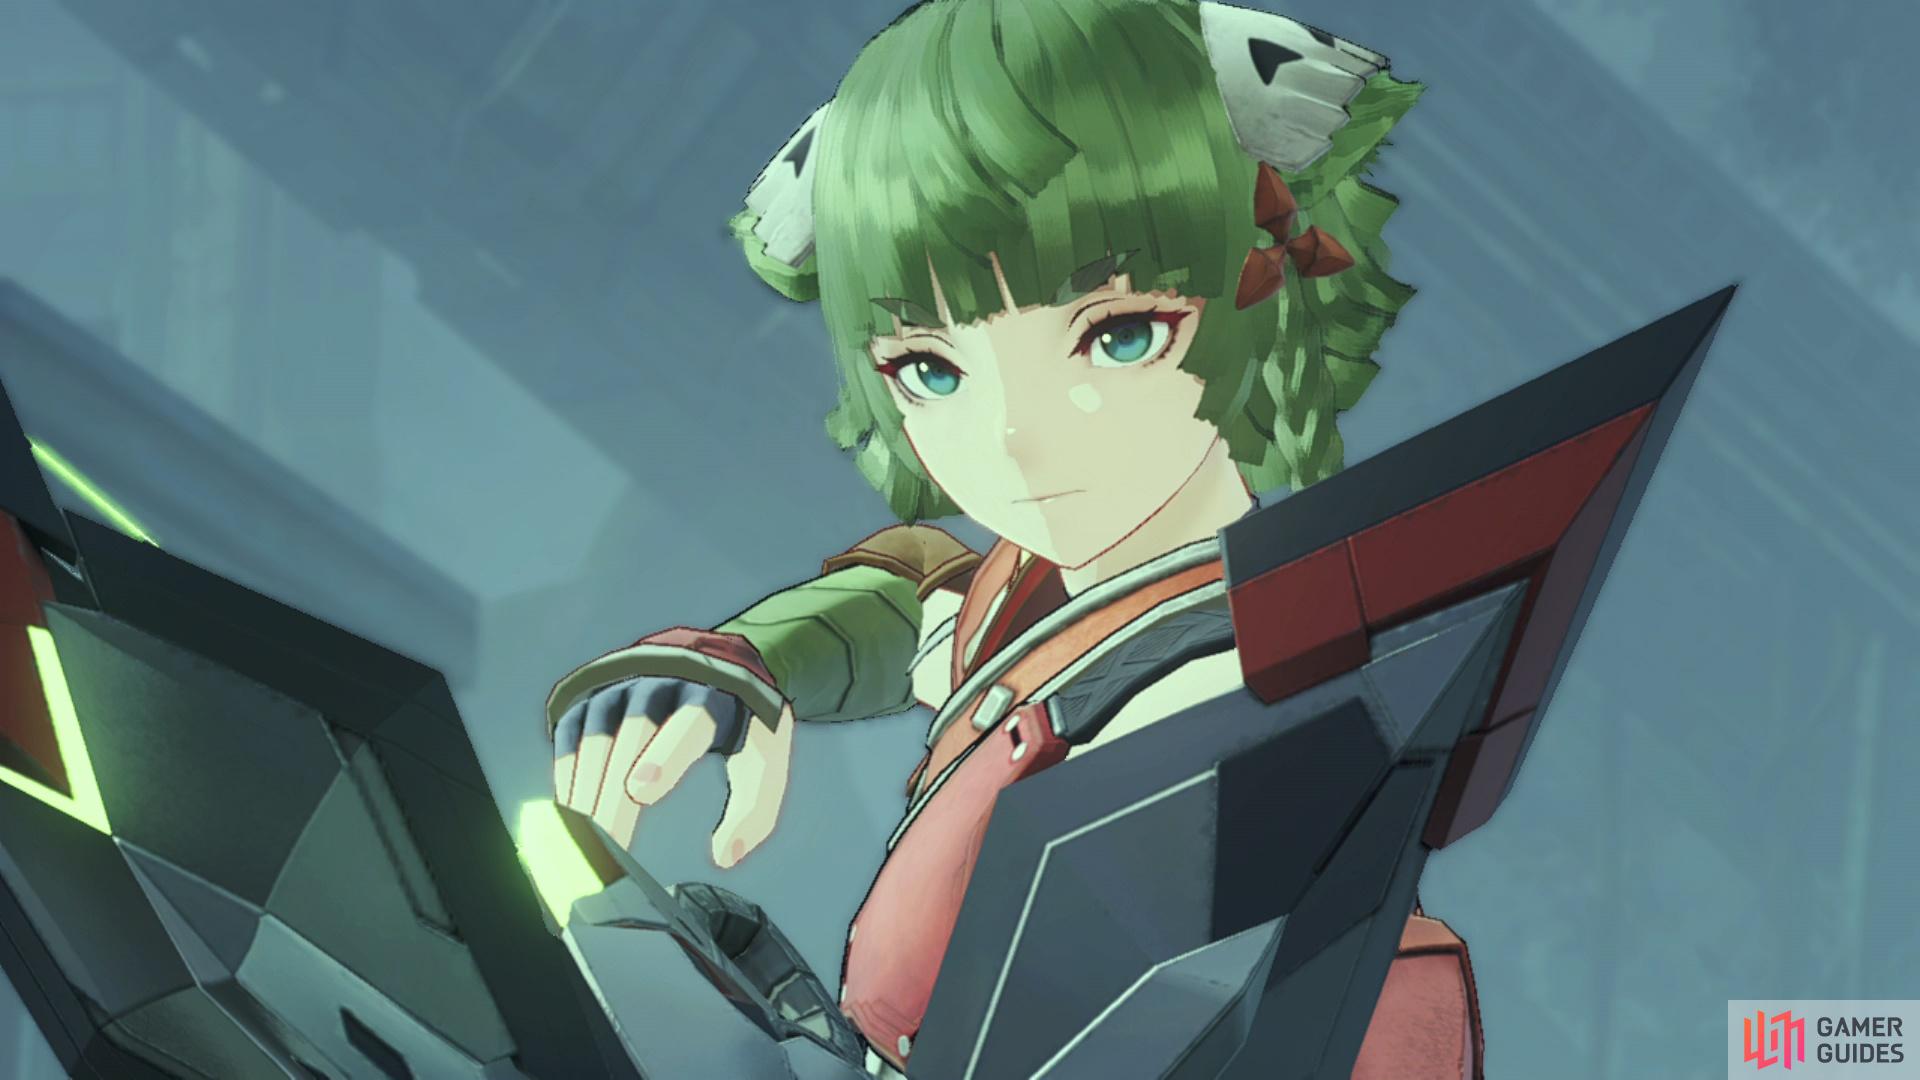 Juniper's Hero Quest is required as part of the main story in Xenoblade Chronicles 3.